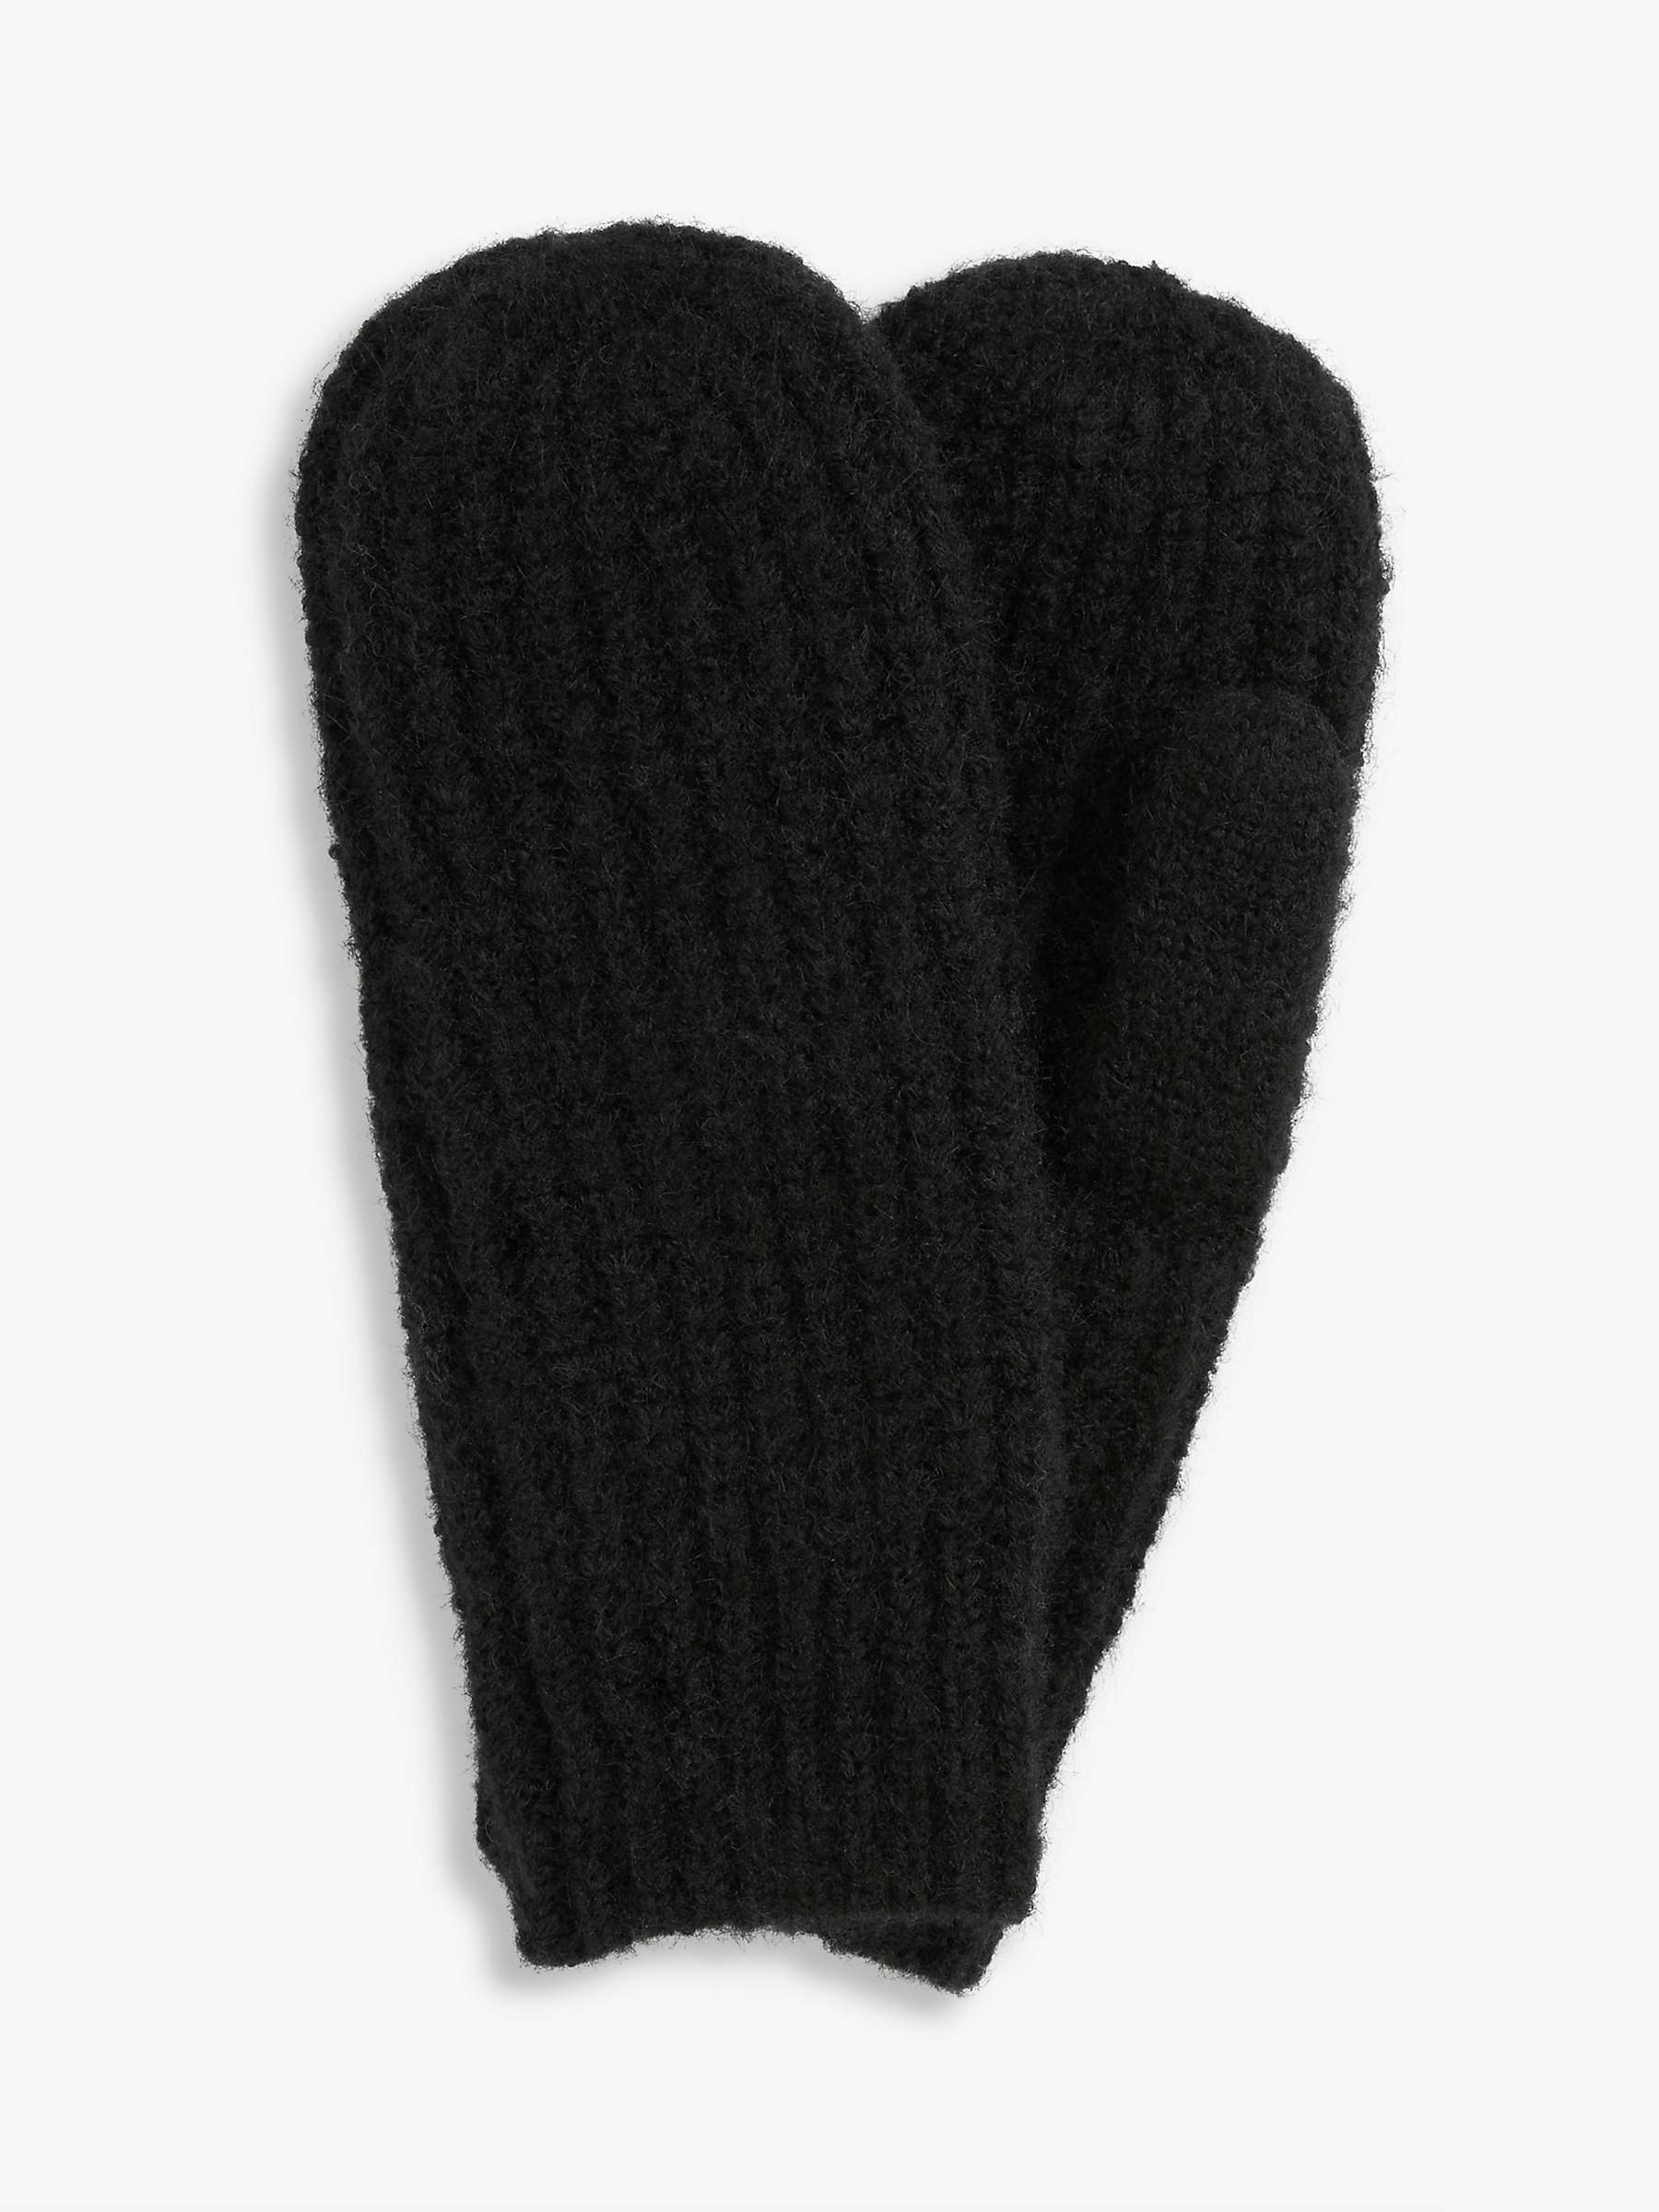 John Lewis ANYDAY Knitted Mittens, Black at John Lewis & Partners